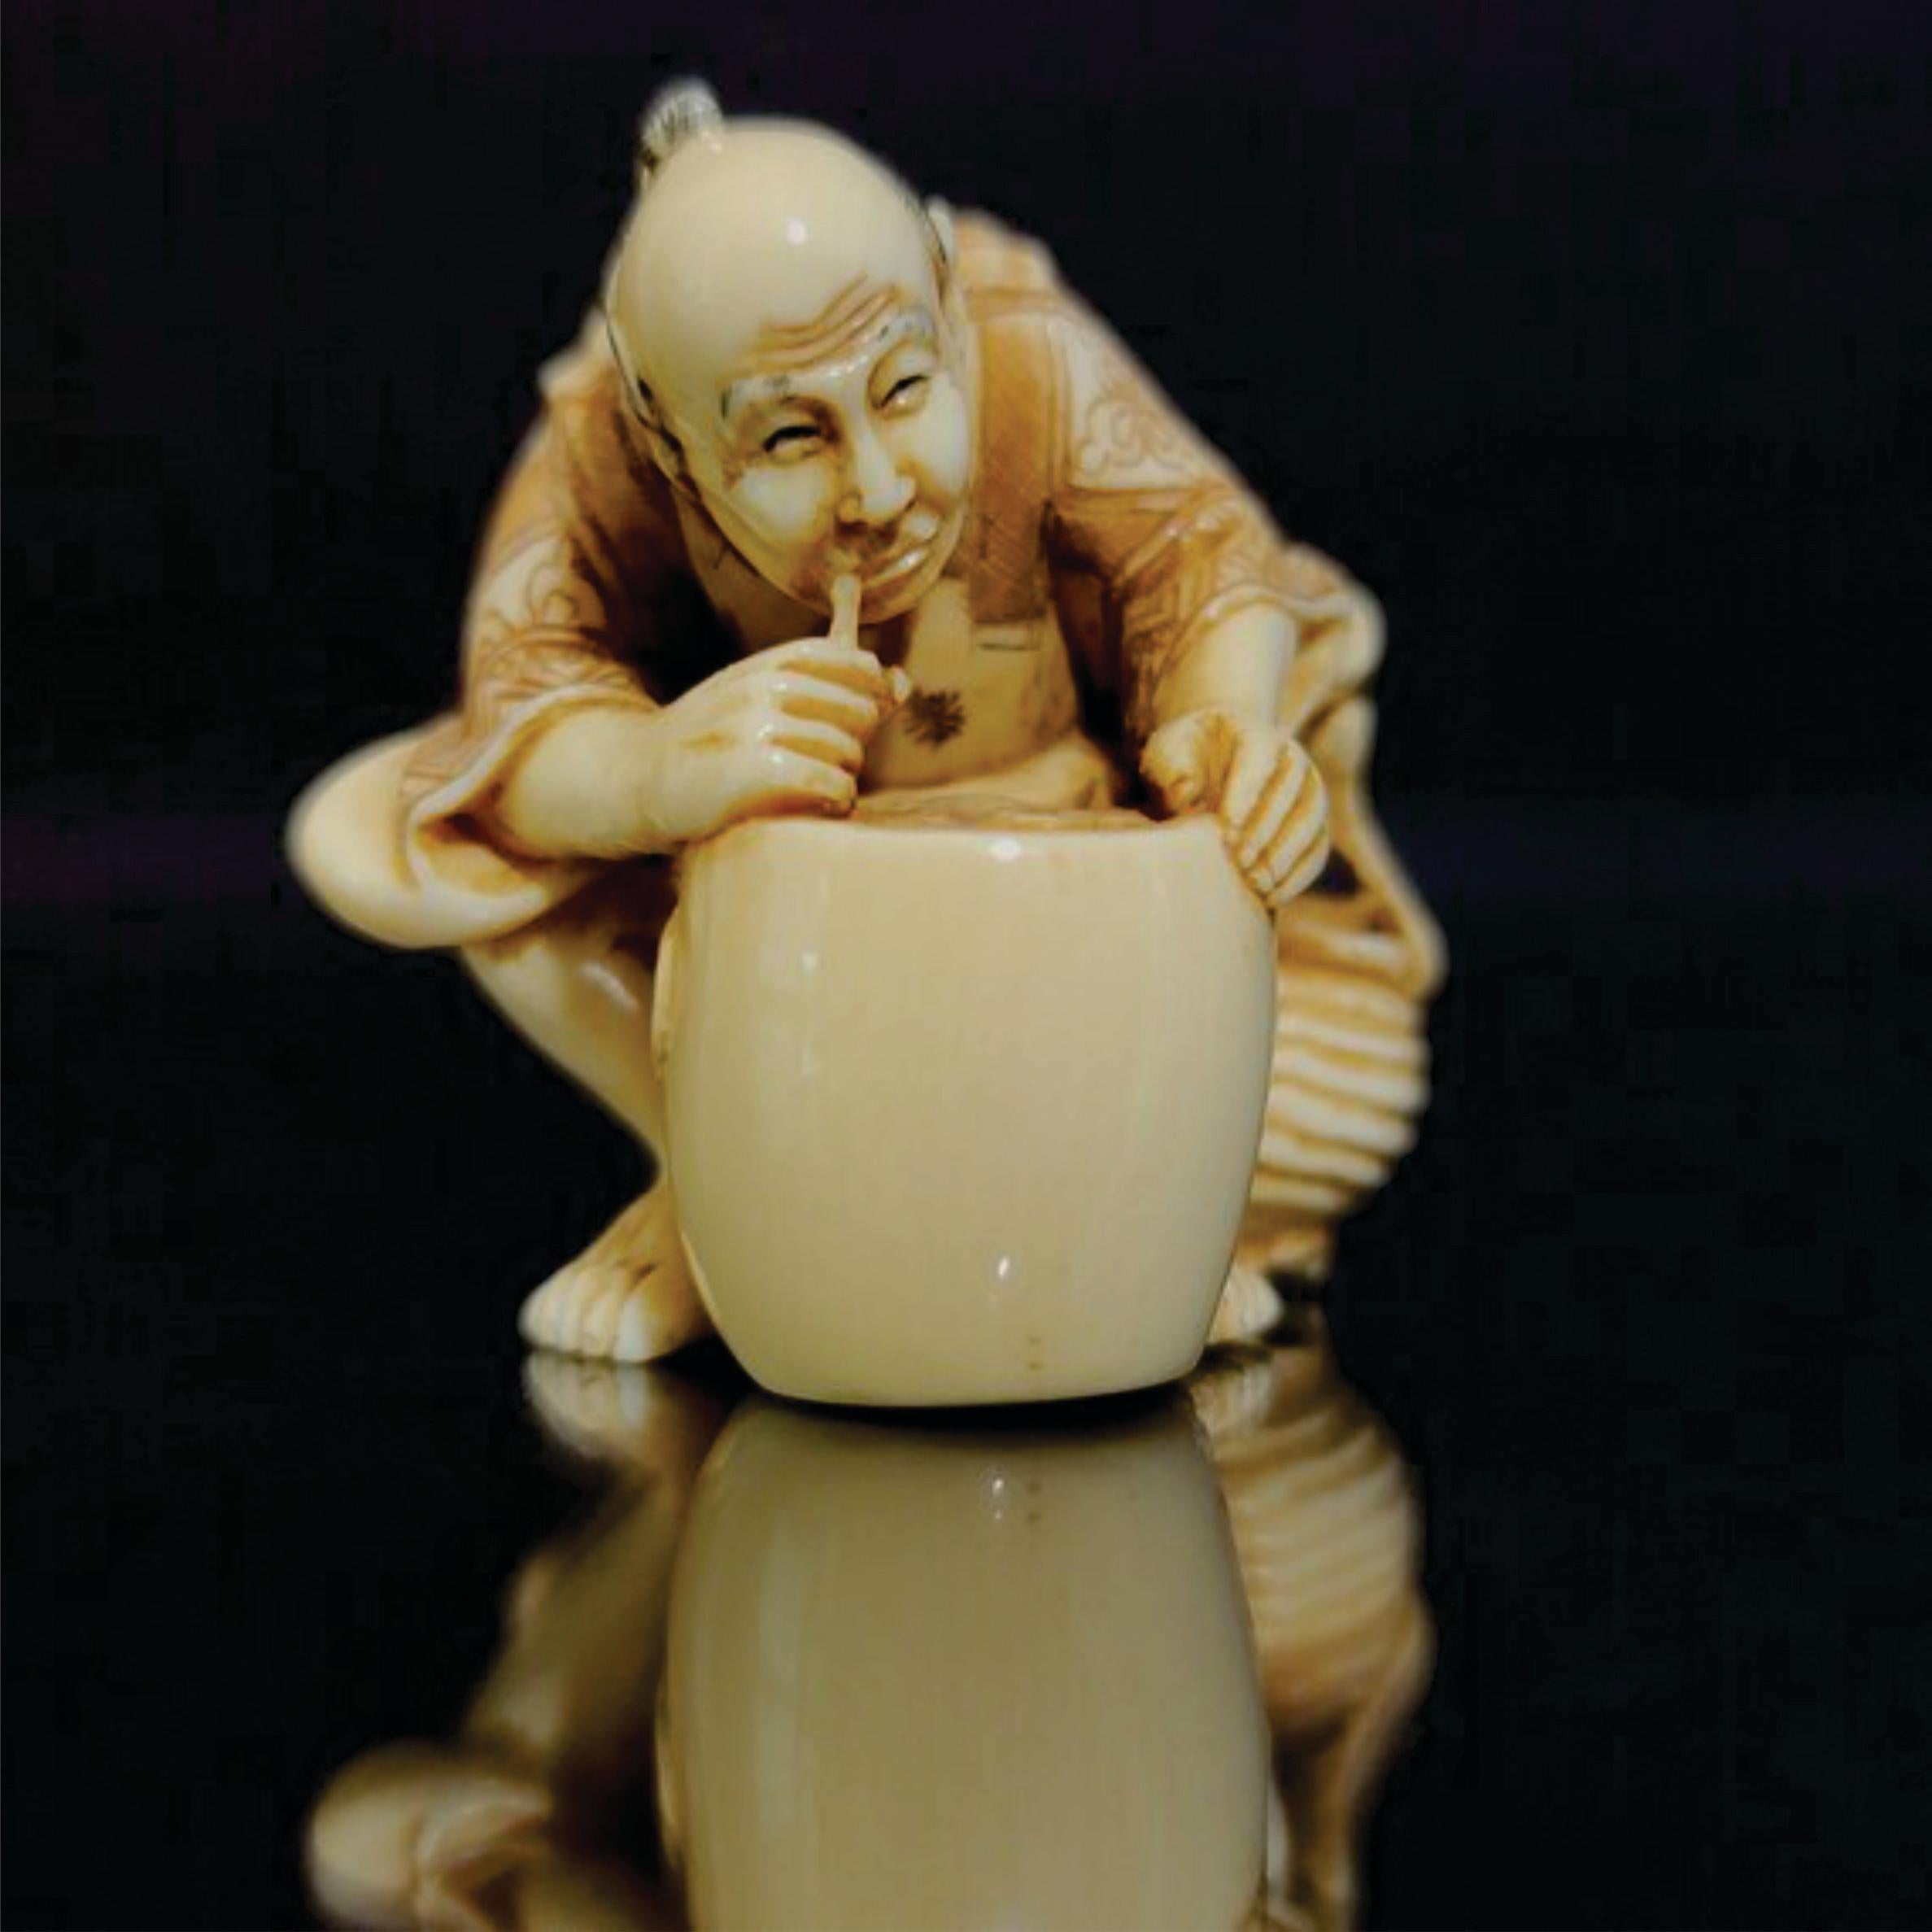 Netsuke Japanese Hand-Carved Polychrome Decorated Figure, Signed by Yoshitomo from the Meiji period. Ric.NA004

A truly hand-carved ivory figure, An old man holding a straw and soaking some sort of liquid from a container, shows a museum quality in